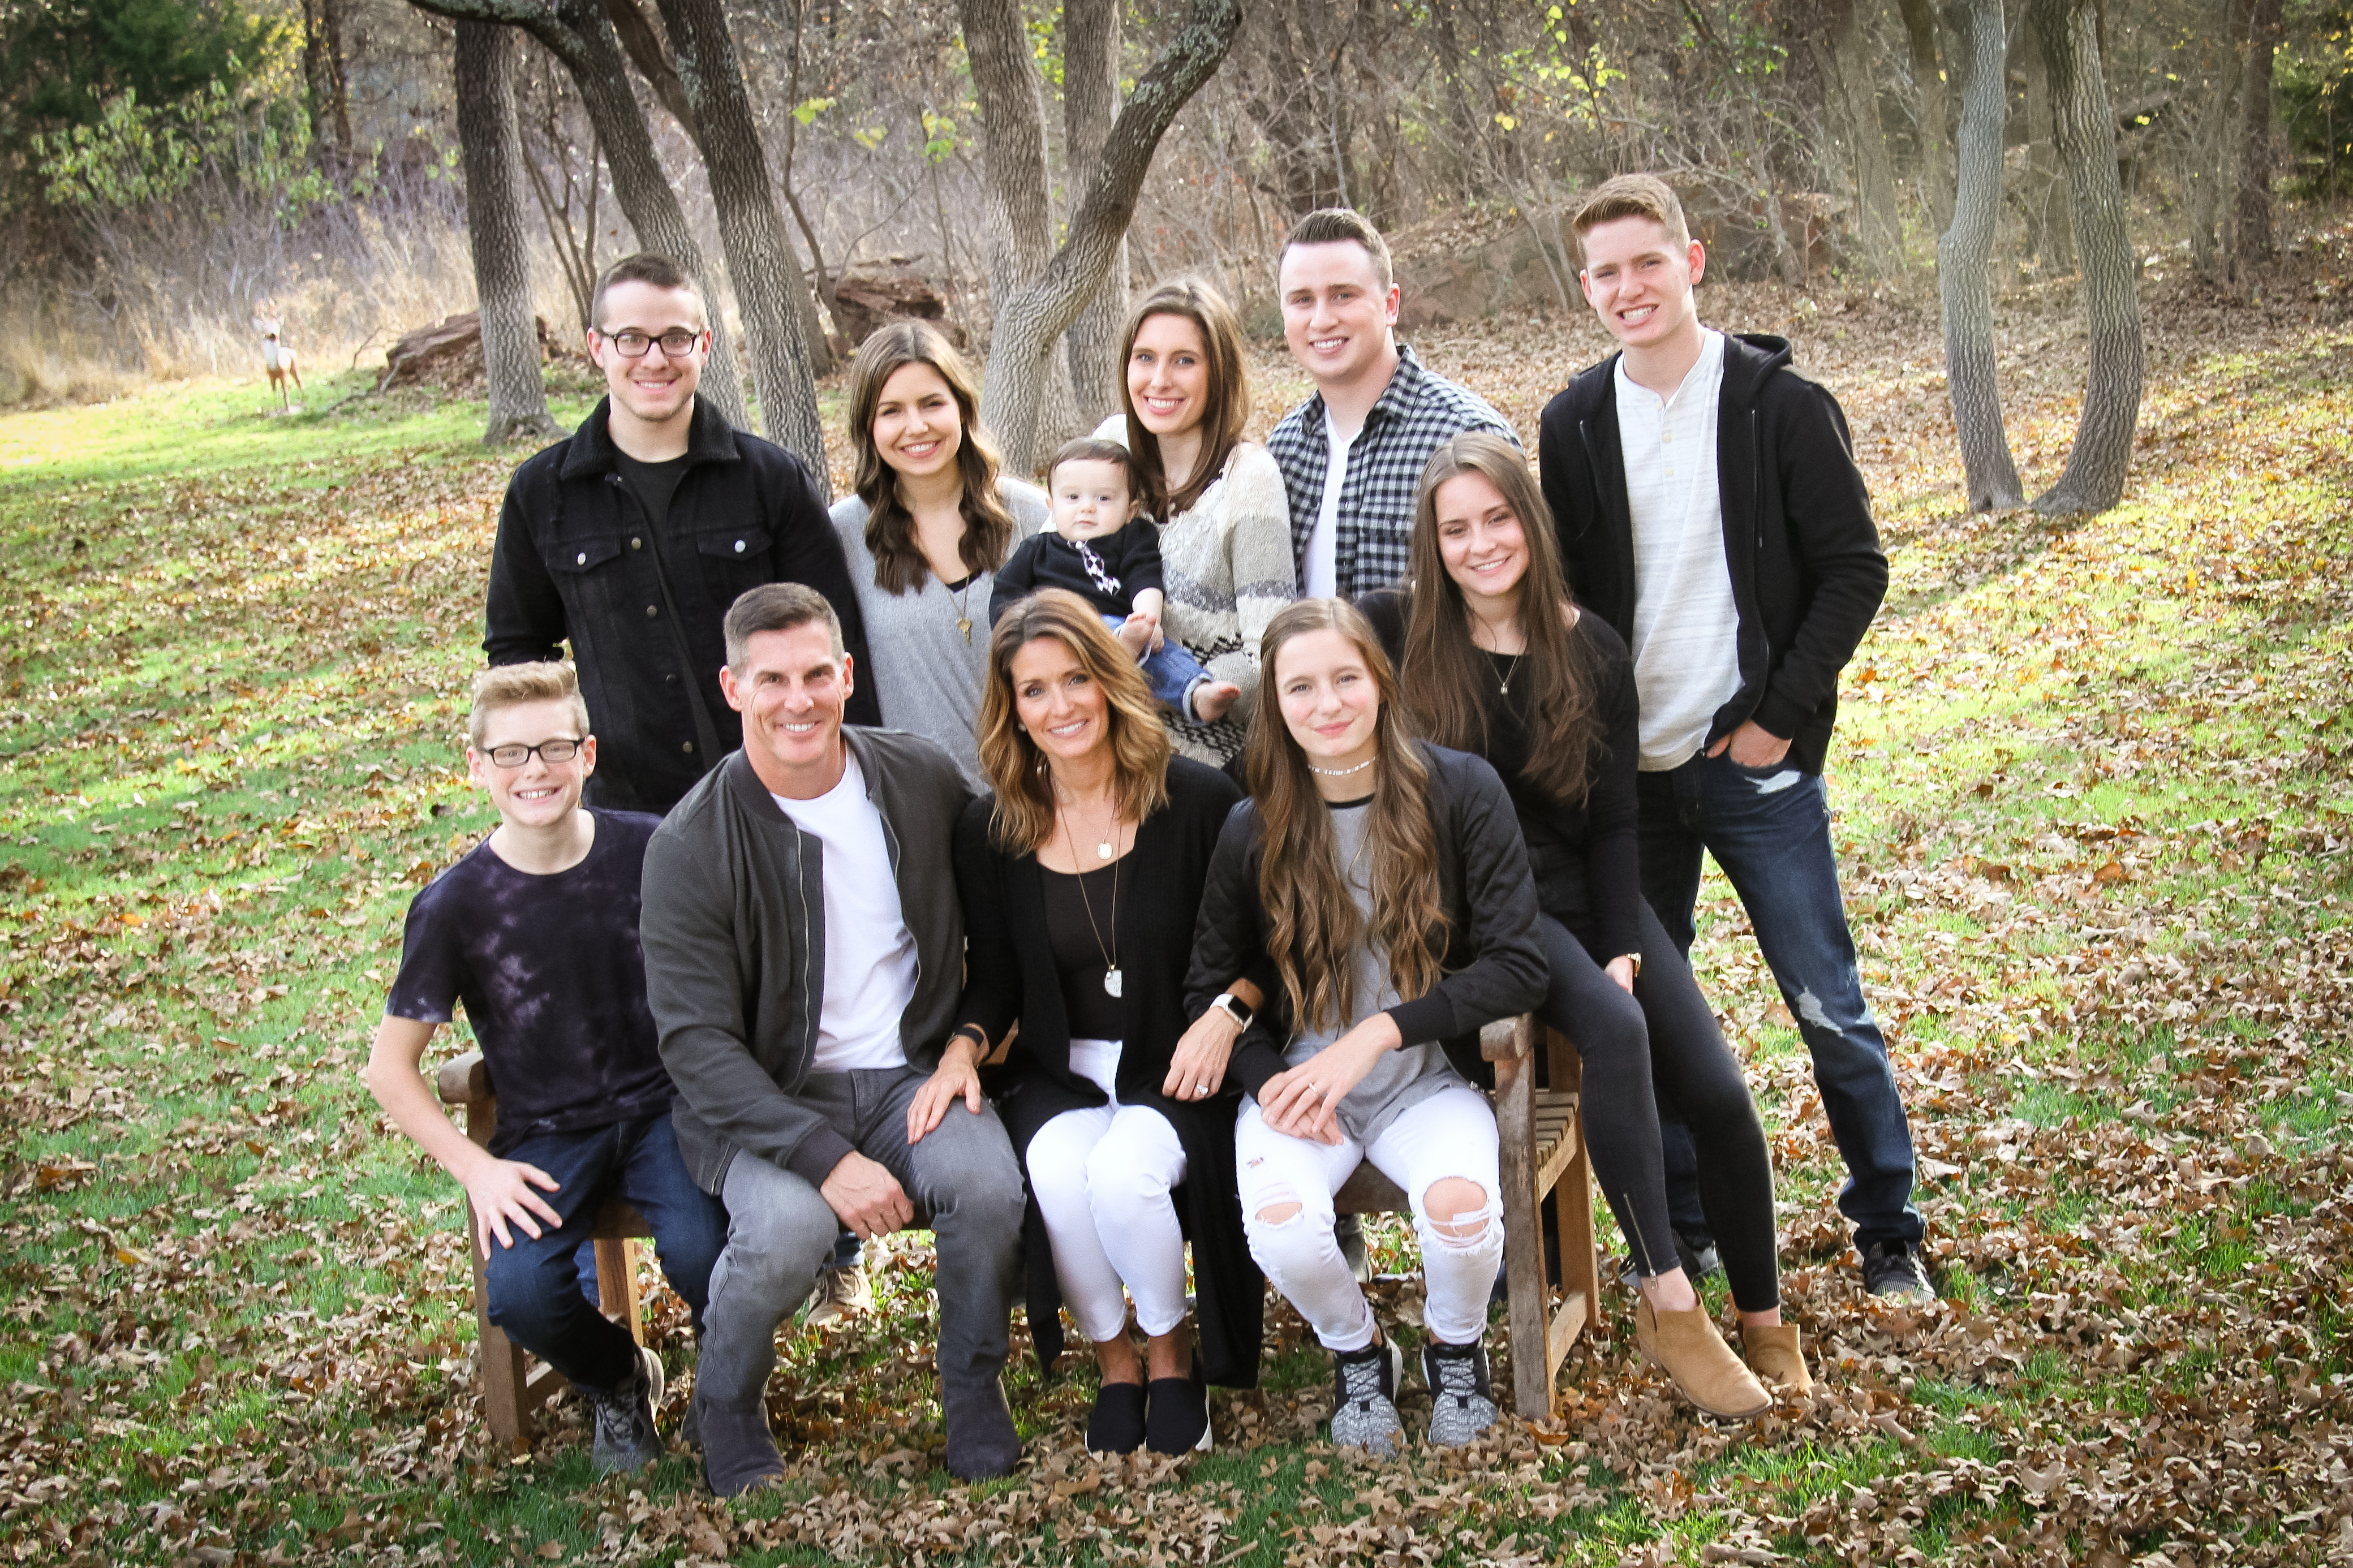 Criag Groeschel and family